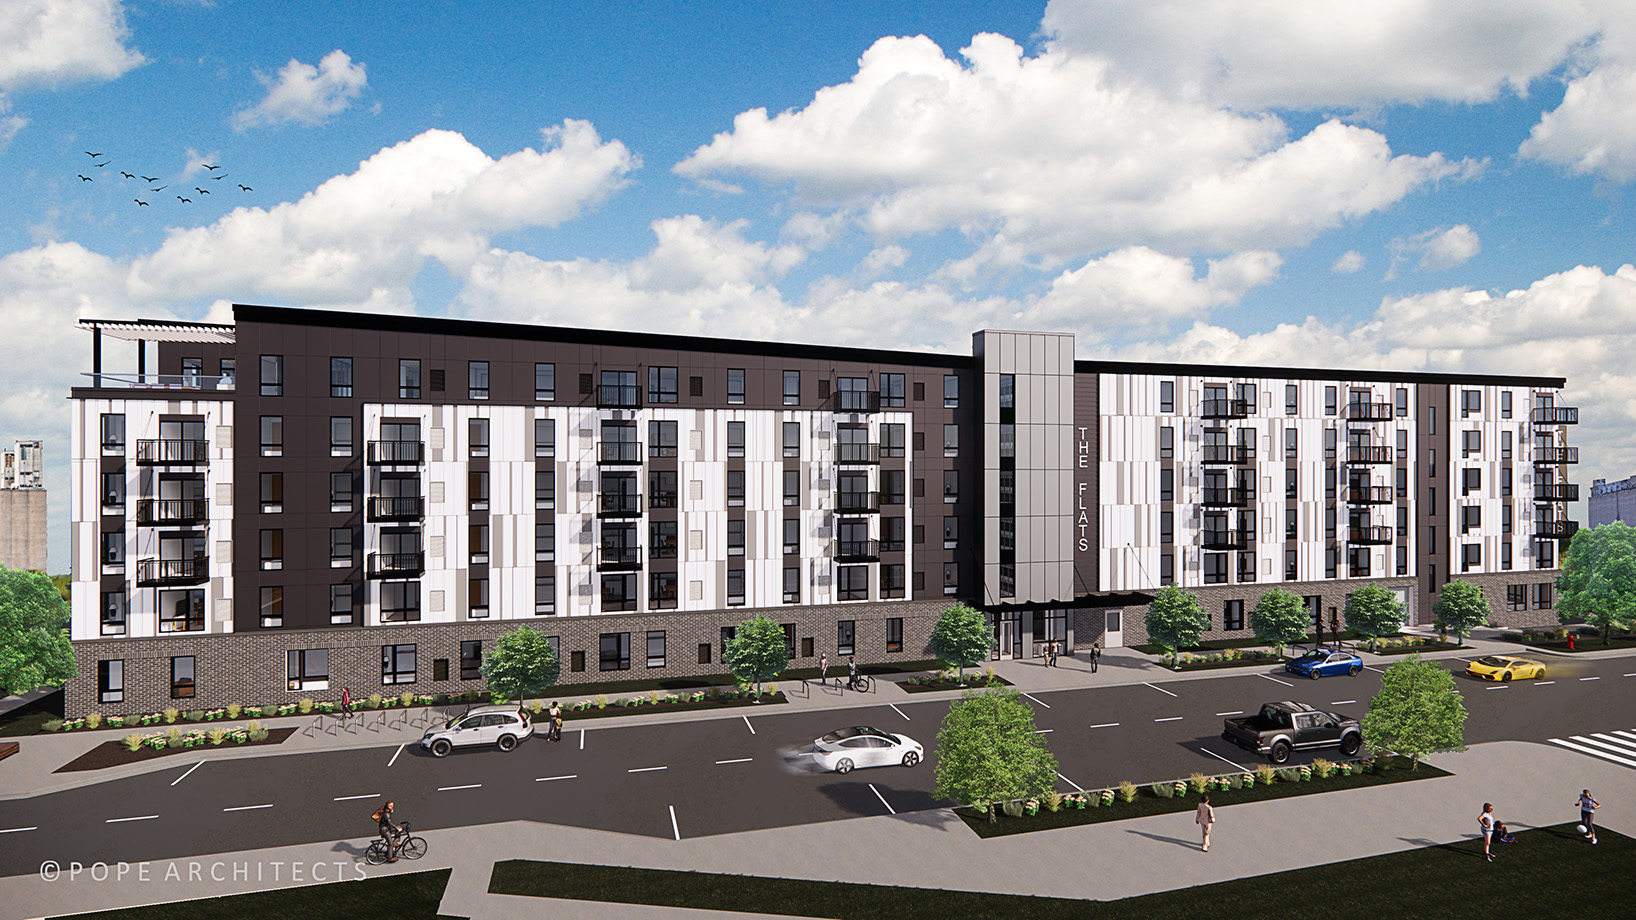 Malcolm Yards project to boost Minneapolis’ affordable housing stock